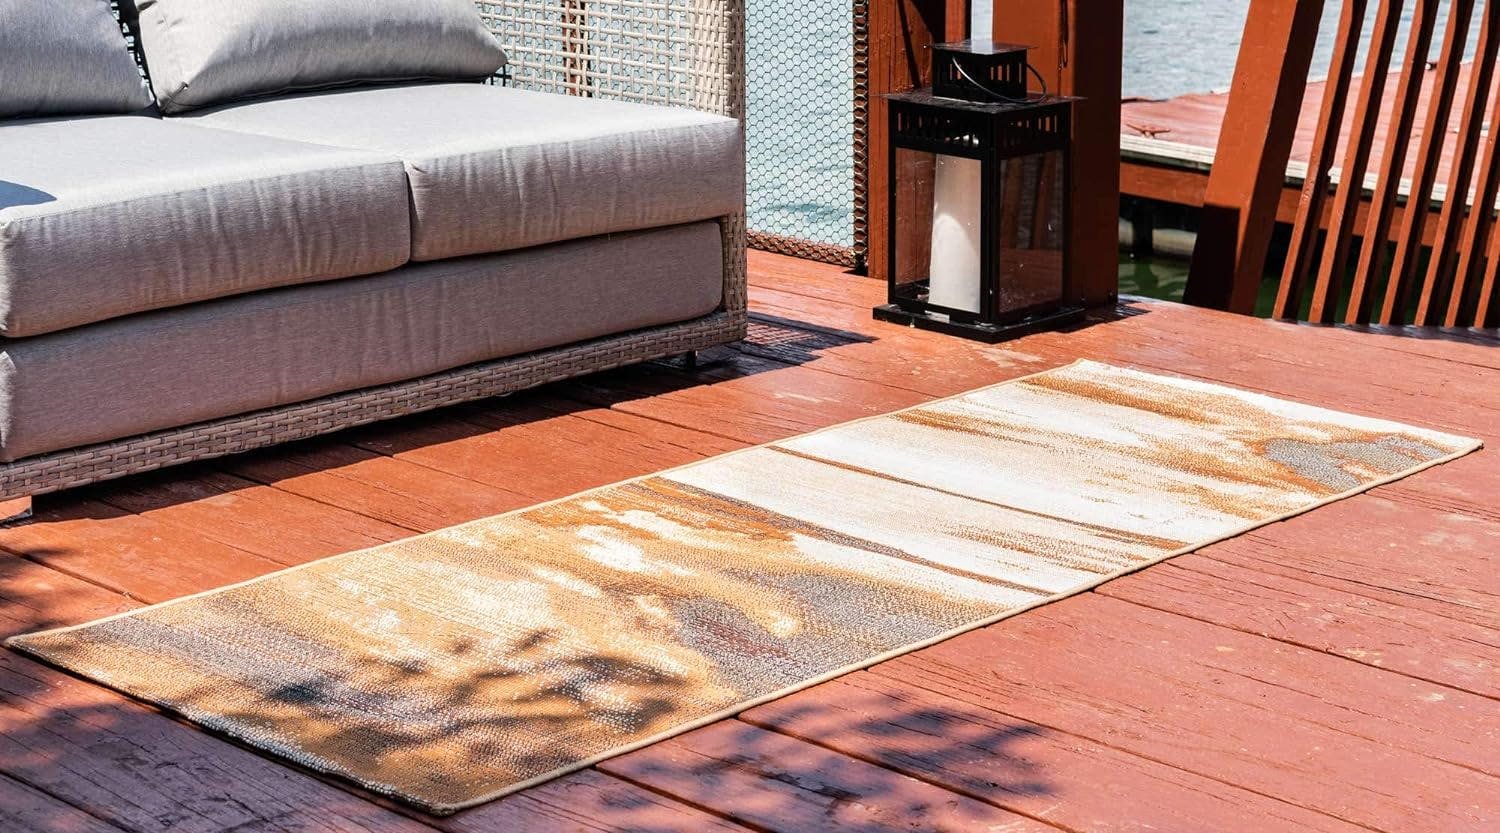 Fluid Abstract Brown and Gray Outdoor Runner Rug - 2' x 6'